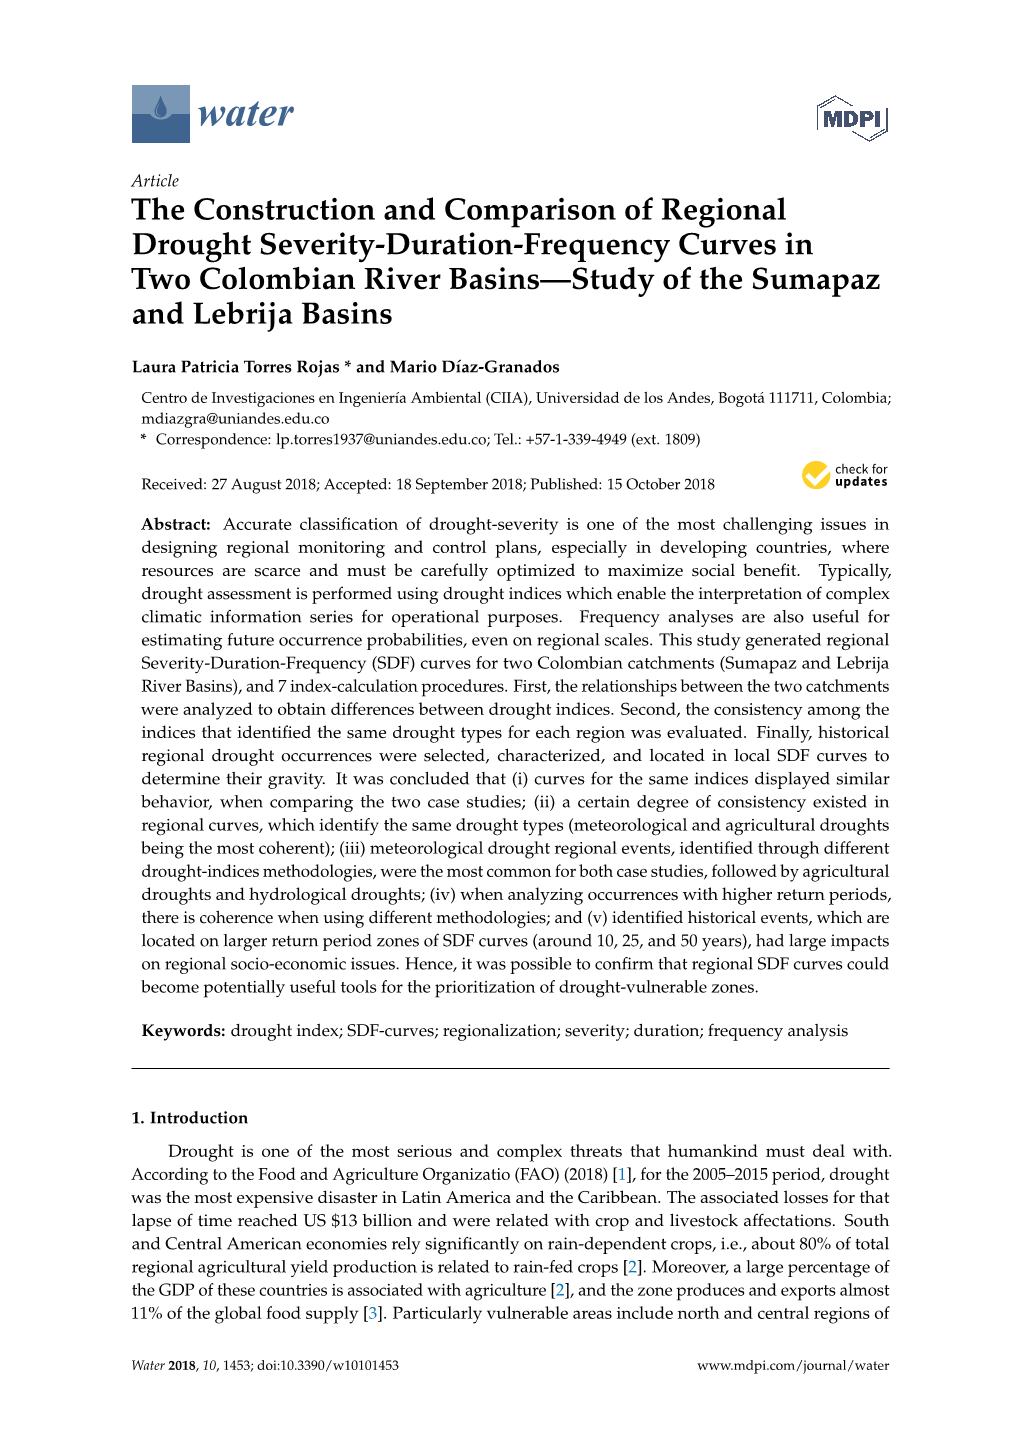 The Construction and Comparison of Regional Drought Severity-Duration-Frequency Curves in Two Colombian River Basins—Study of the Sumapaz and Lebrija Basins